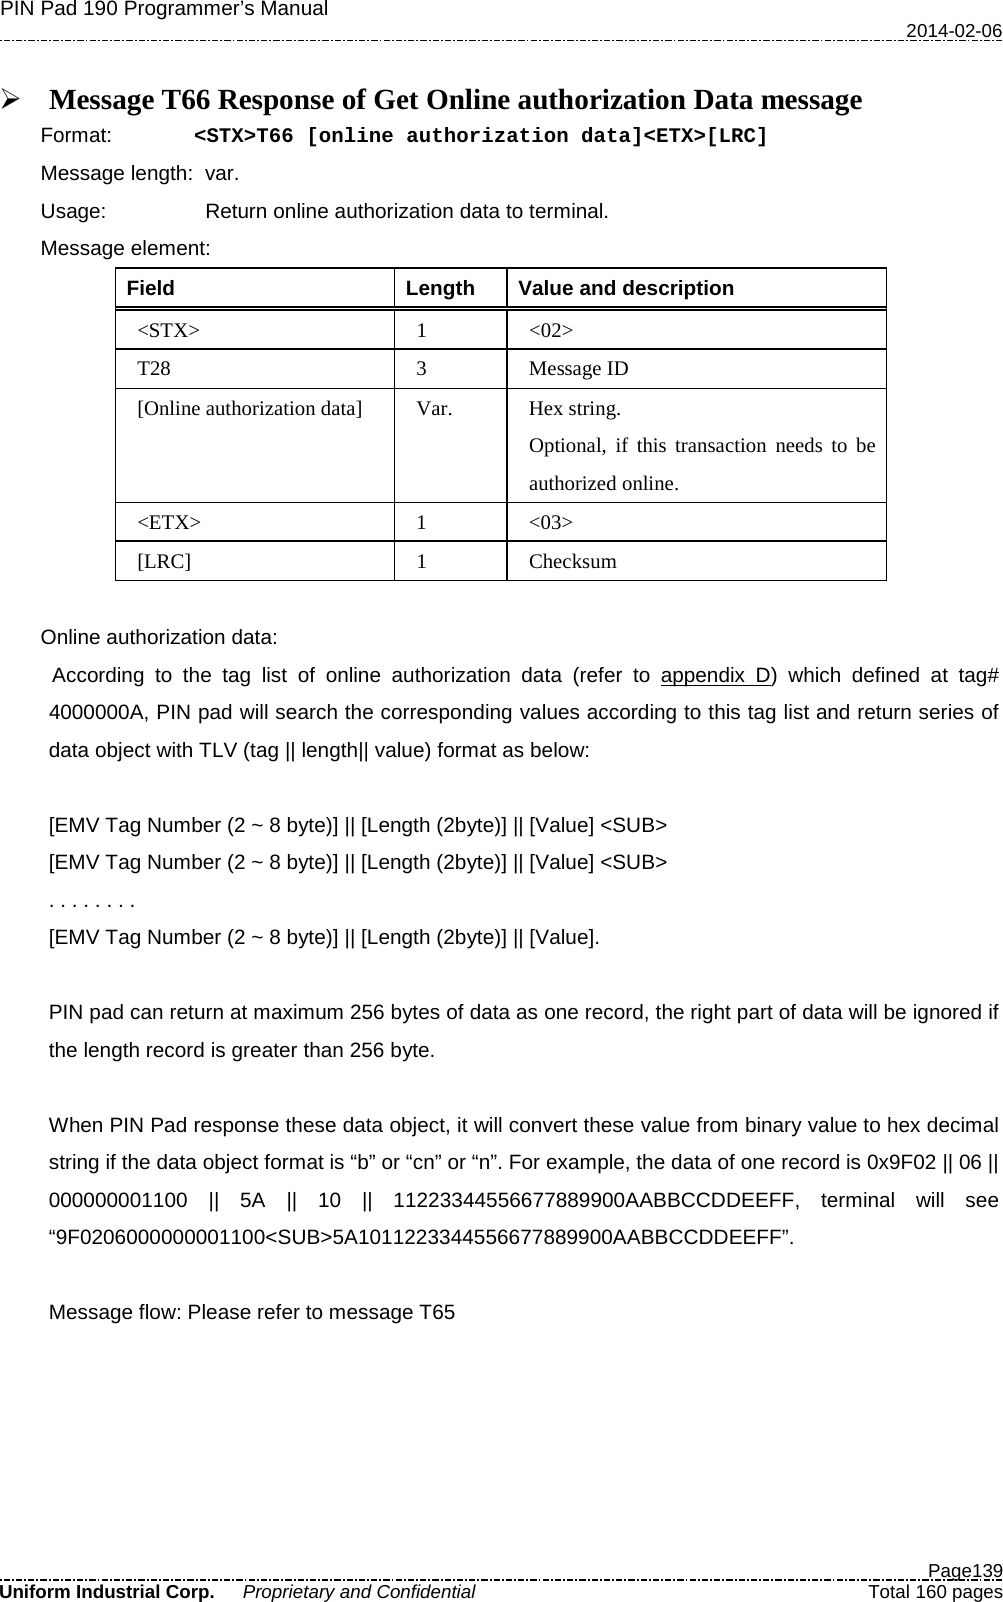 PIN Pad 190 Programmer’s Manual   2014-02-06  Page139 Uniform Industrial Corp. Proprietary and Confidential  Total 160 pages   Message T66 Response of Get Online authorization Data message Format: &lt;STX&gt;T66 [online authorization data]&lt;ETX&gt;[LRC] Message length: var. Usage: Return online authorization data to terminal. Message element:   Field  Length  Value and description &lt;STX&gt;  1  &lt;02&gt; T28  3  Message ID [Online authorization data] Var. Hex string. Optional, if this transaction needs to be authorized online. &lt;ETX&gt;  1  &lt;03&gt; [LRC]  1  Checksum  Online authorization data: According to the tag list of online authorization data (refer to appendix D) which defined at tag# 4000000A, PIN pad will search the corresponding values according to this tag list and return series of data object with TLV (tag || length|| value) format as below:  [EMV Tag Number (2 ~ 8 byte)] || [Length (2byte)] || [Value] &lt;SUB&gt; [EMV Tag Number (2 ~ 8 byte)] || [Length (2byte)] || [Value] &lt;SUB&gt; . . . . . . . .   [EMV Tag Number (2 ~ 8 byte)] || [Length (2byte)] || [Value].    PIN pad can return at maximum 256 bytes of data as one record, the right part of data will be ignored if the length record is greater than 256 byte.  When PIN Pad response these data object, it will convert these value from binary value to hex decimal string if the data object format is “b” or “cn” or “n”. For example, the data of one record is 0x9F02 || 06 || 000000001100 || 5A || 10 || 11223344556677889900AABBCCDDEEFF, terminal will see “9F0206000000001100&lt;SUB&gt;5A1011223344556677889900AABBCCDDEEFF”.  Message flow: Please refer to message T65 